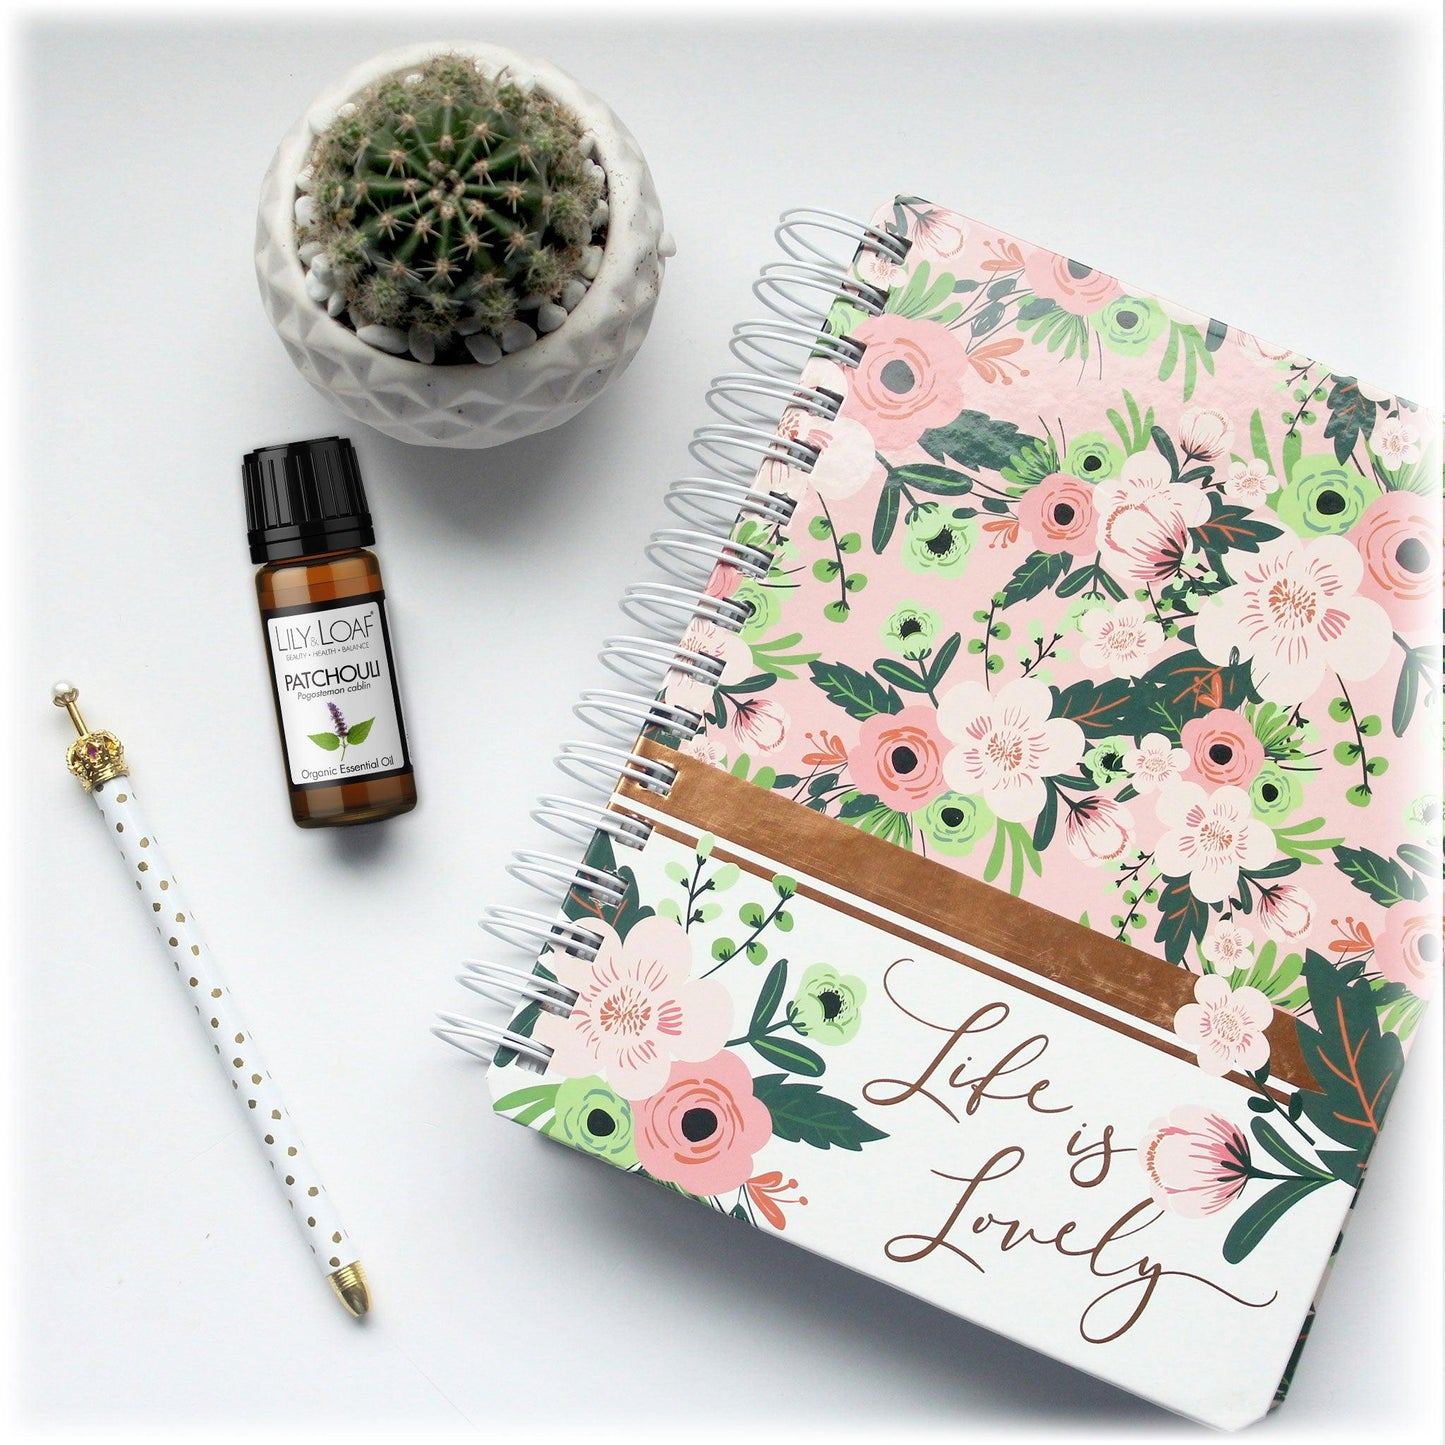 Lily & Loaf Patchouli essential oil bottle next to a floral notebook, a gold-topped pen, and a small cactus on a white surface. Promotes relaxation and creativity.